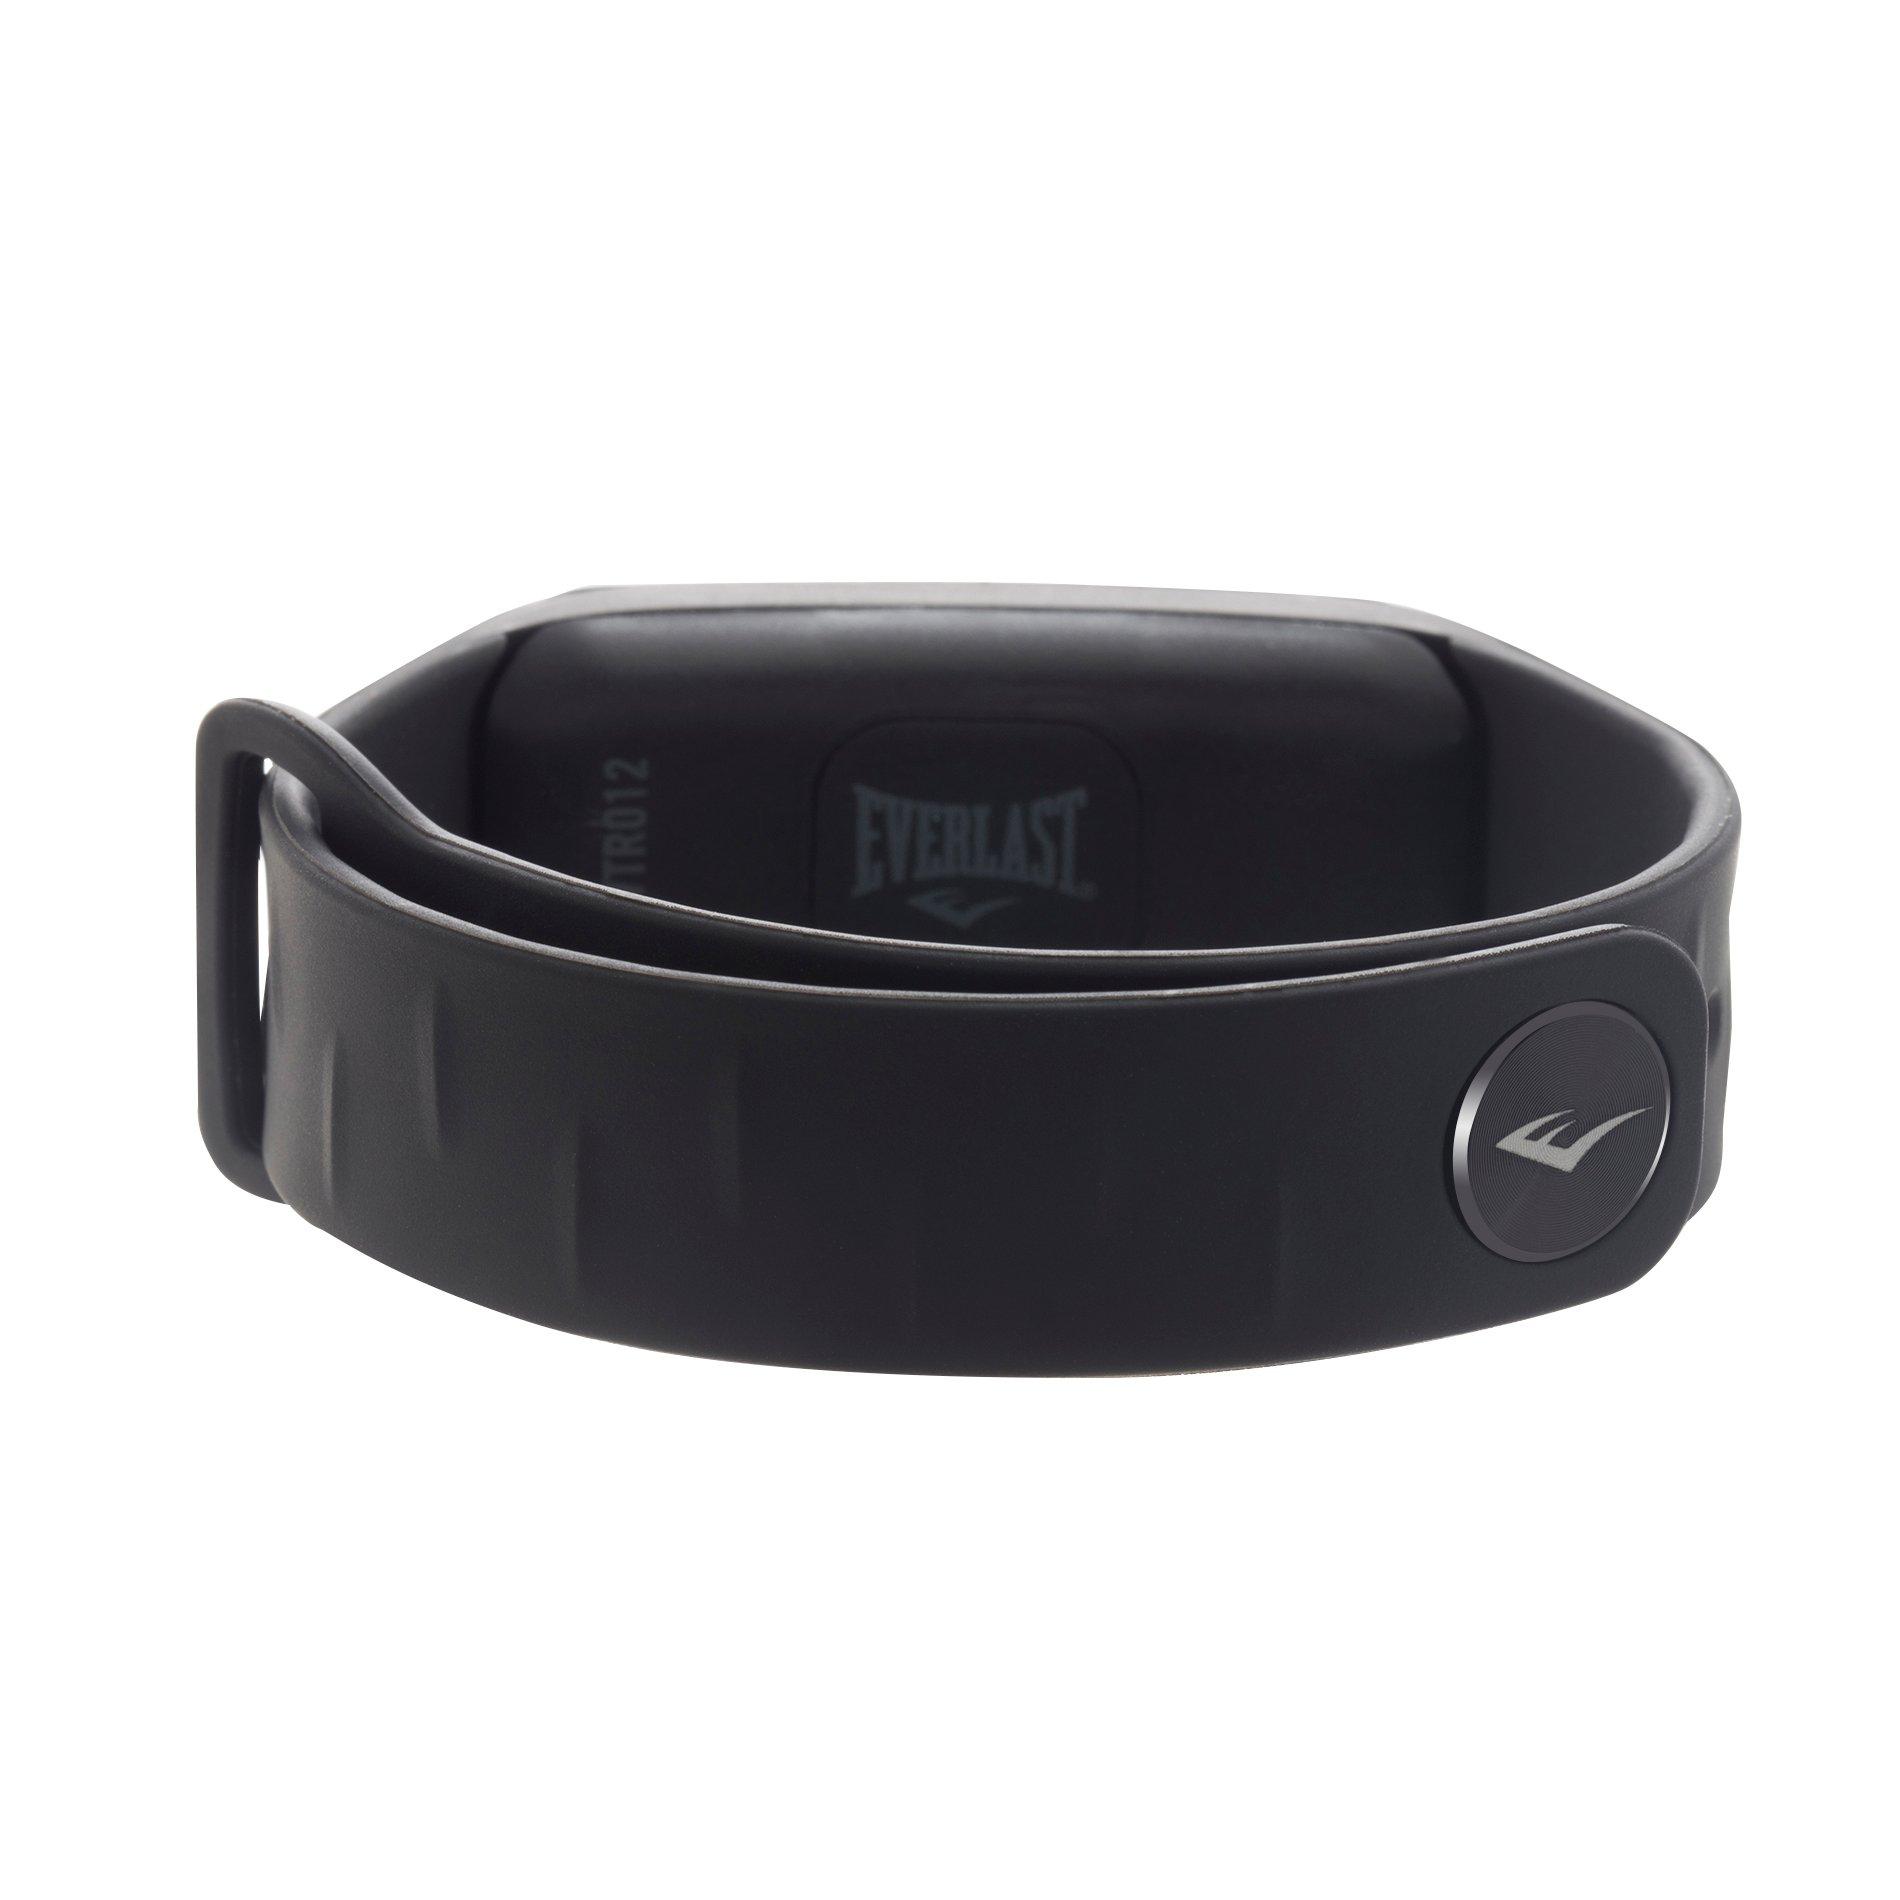 list item 2 of 4 Everlast TR12 Fitness Tracker Bluetooth with Call and Text Alerts Watch